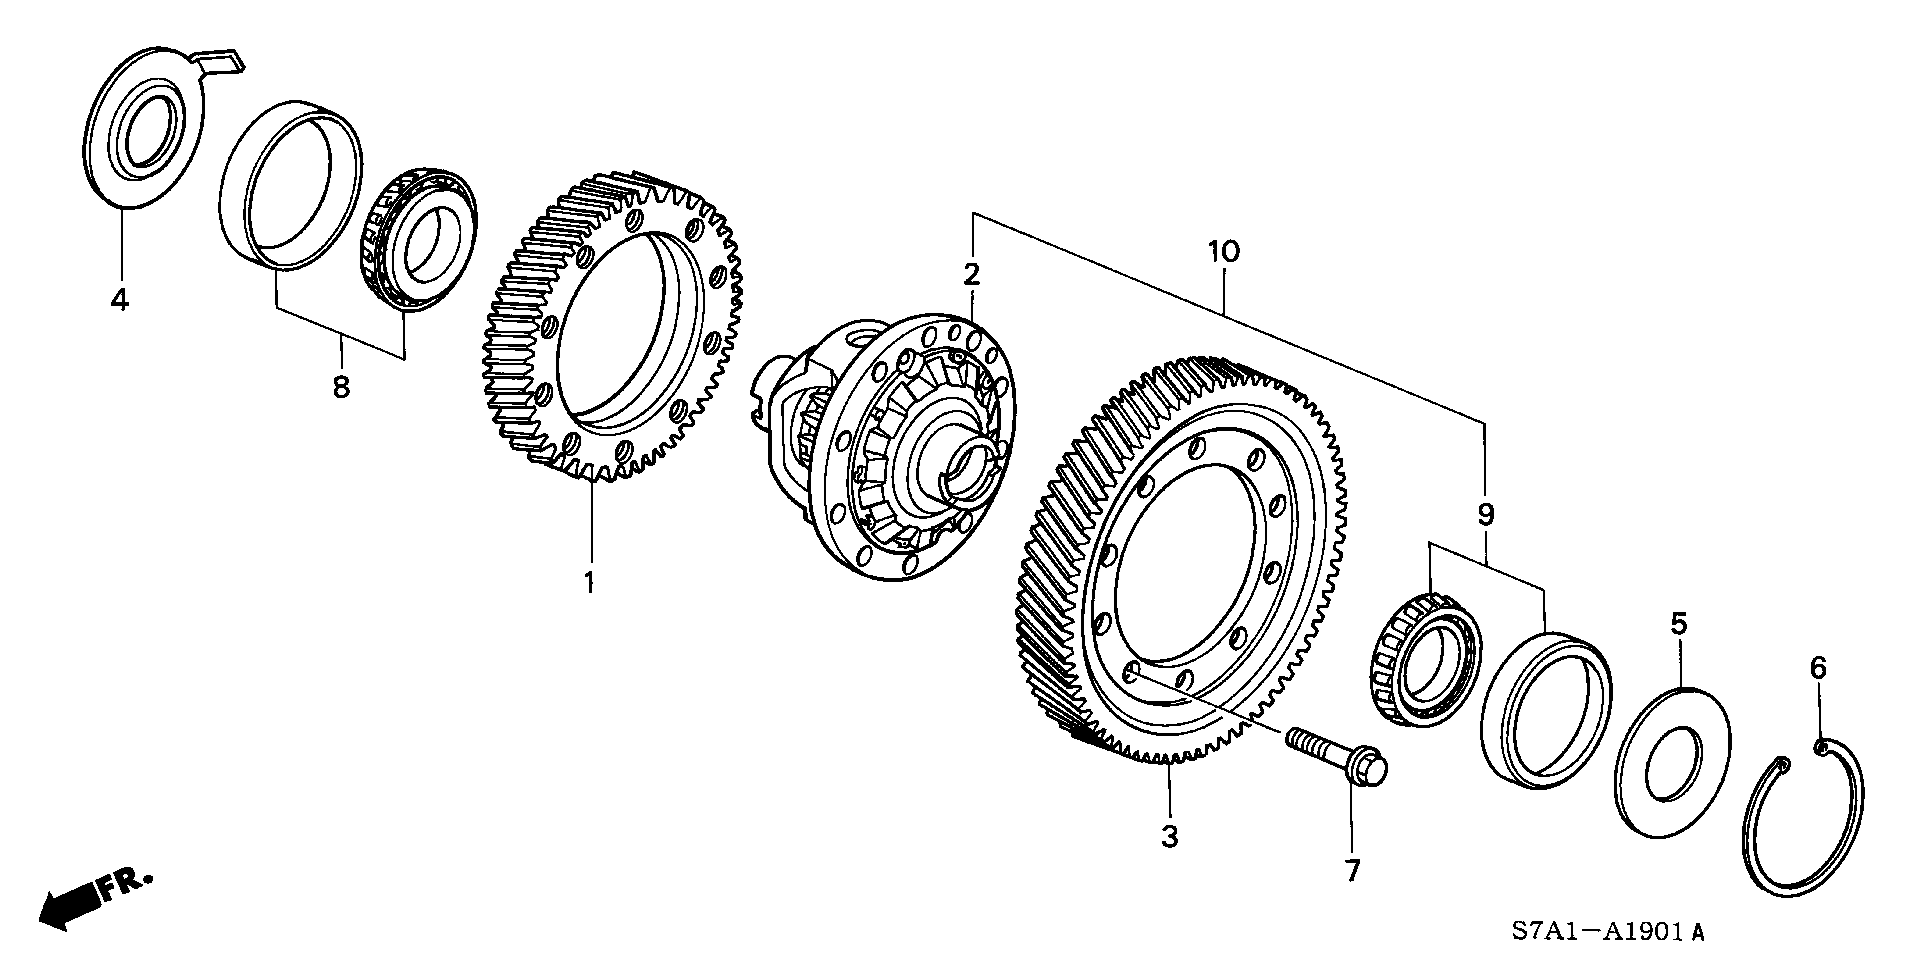 DIFFERENTIAL(2.0L) (4WD)